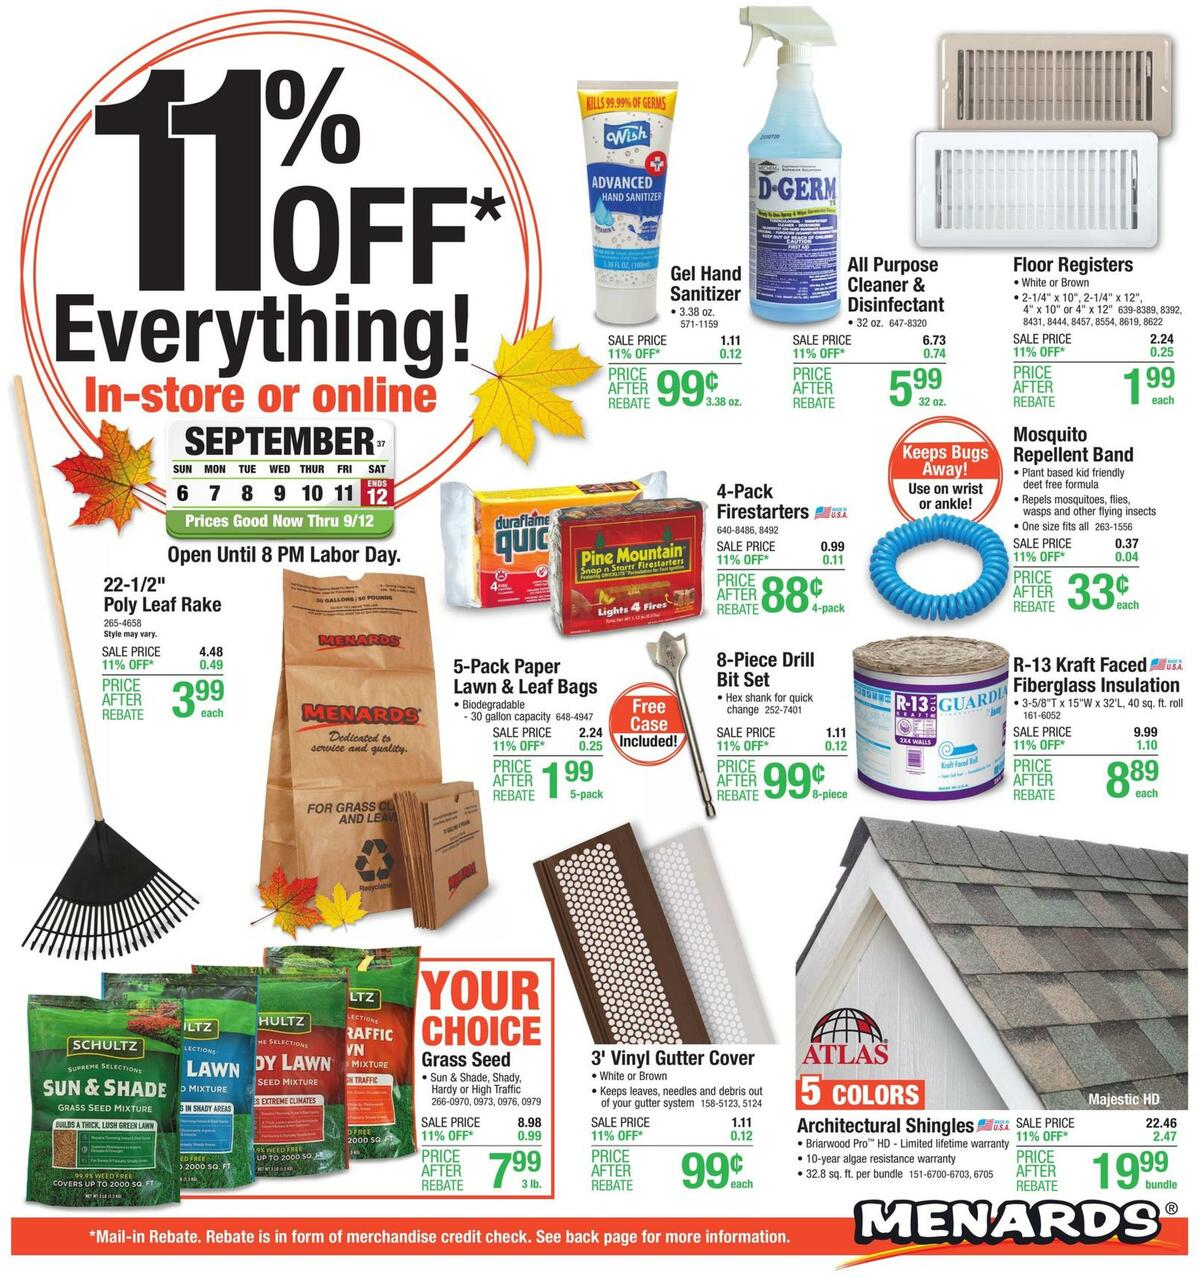 Menards Weekly Ads & Special Buys from September 6